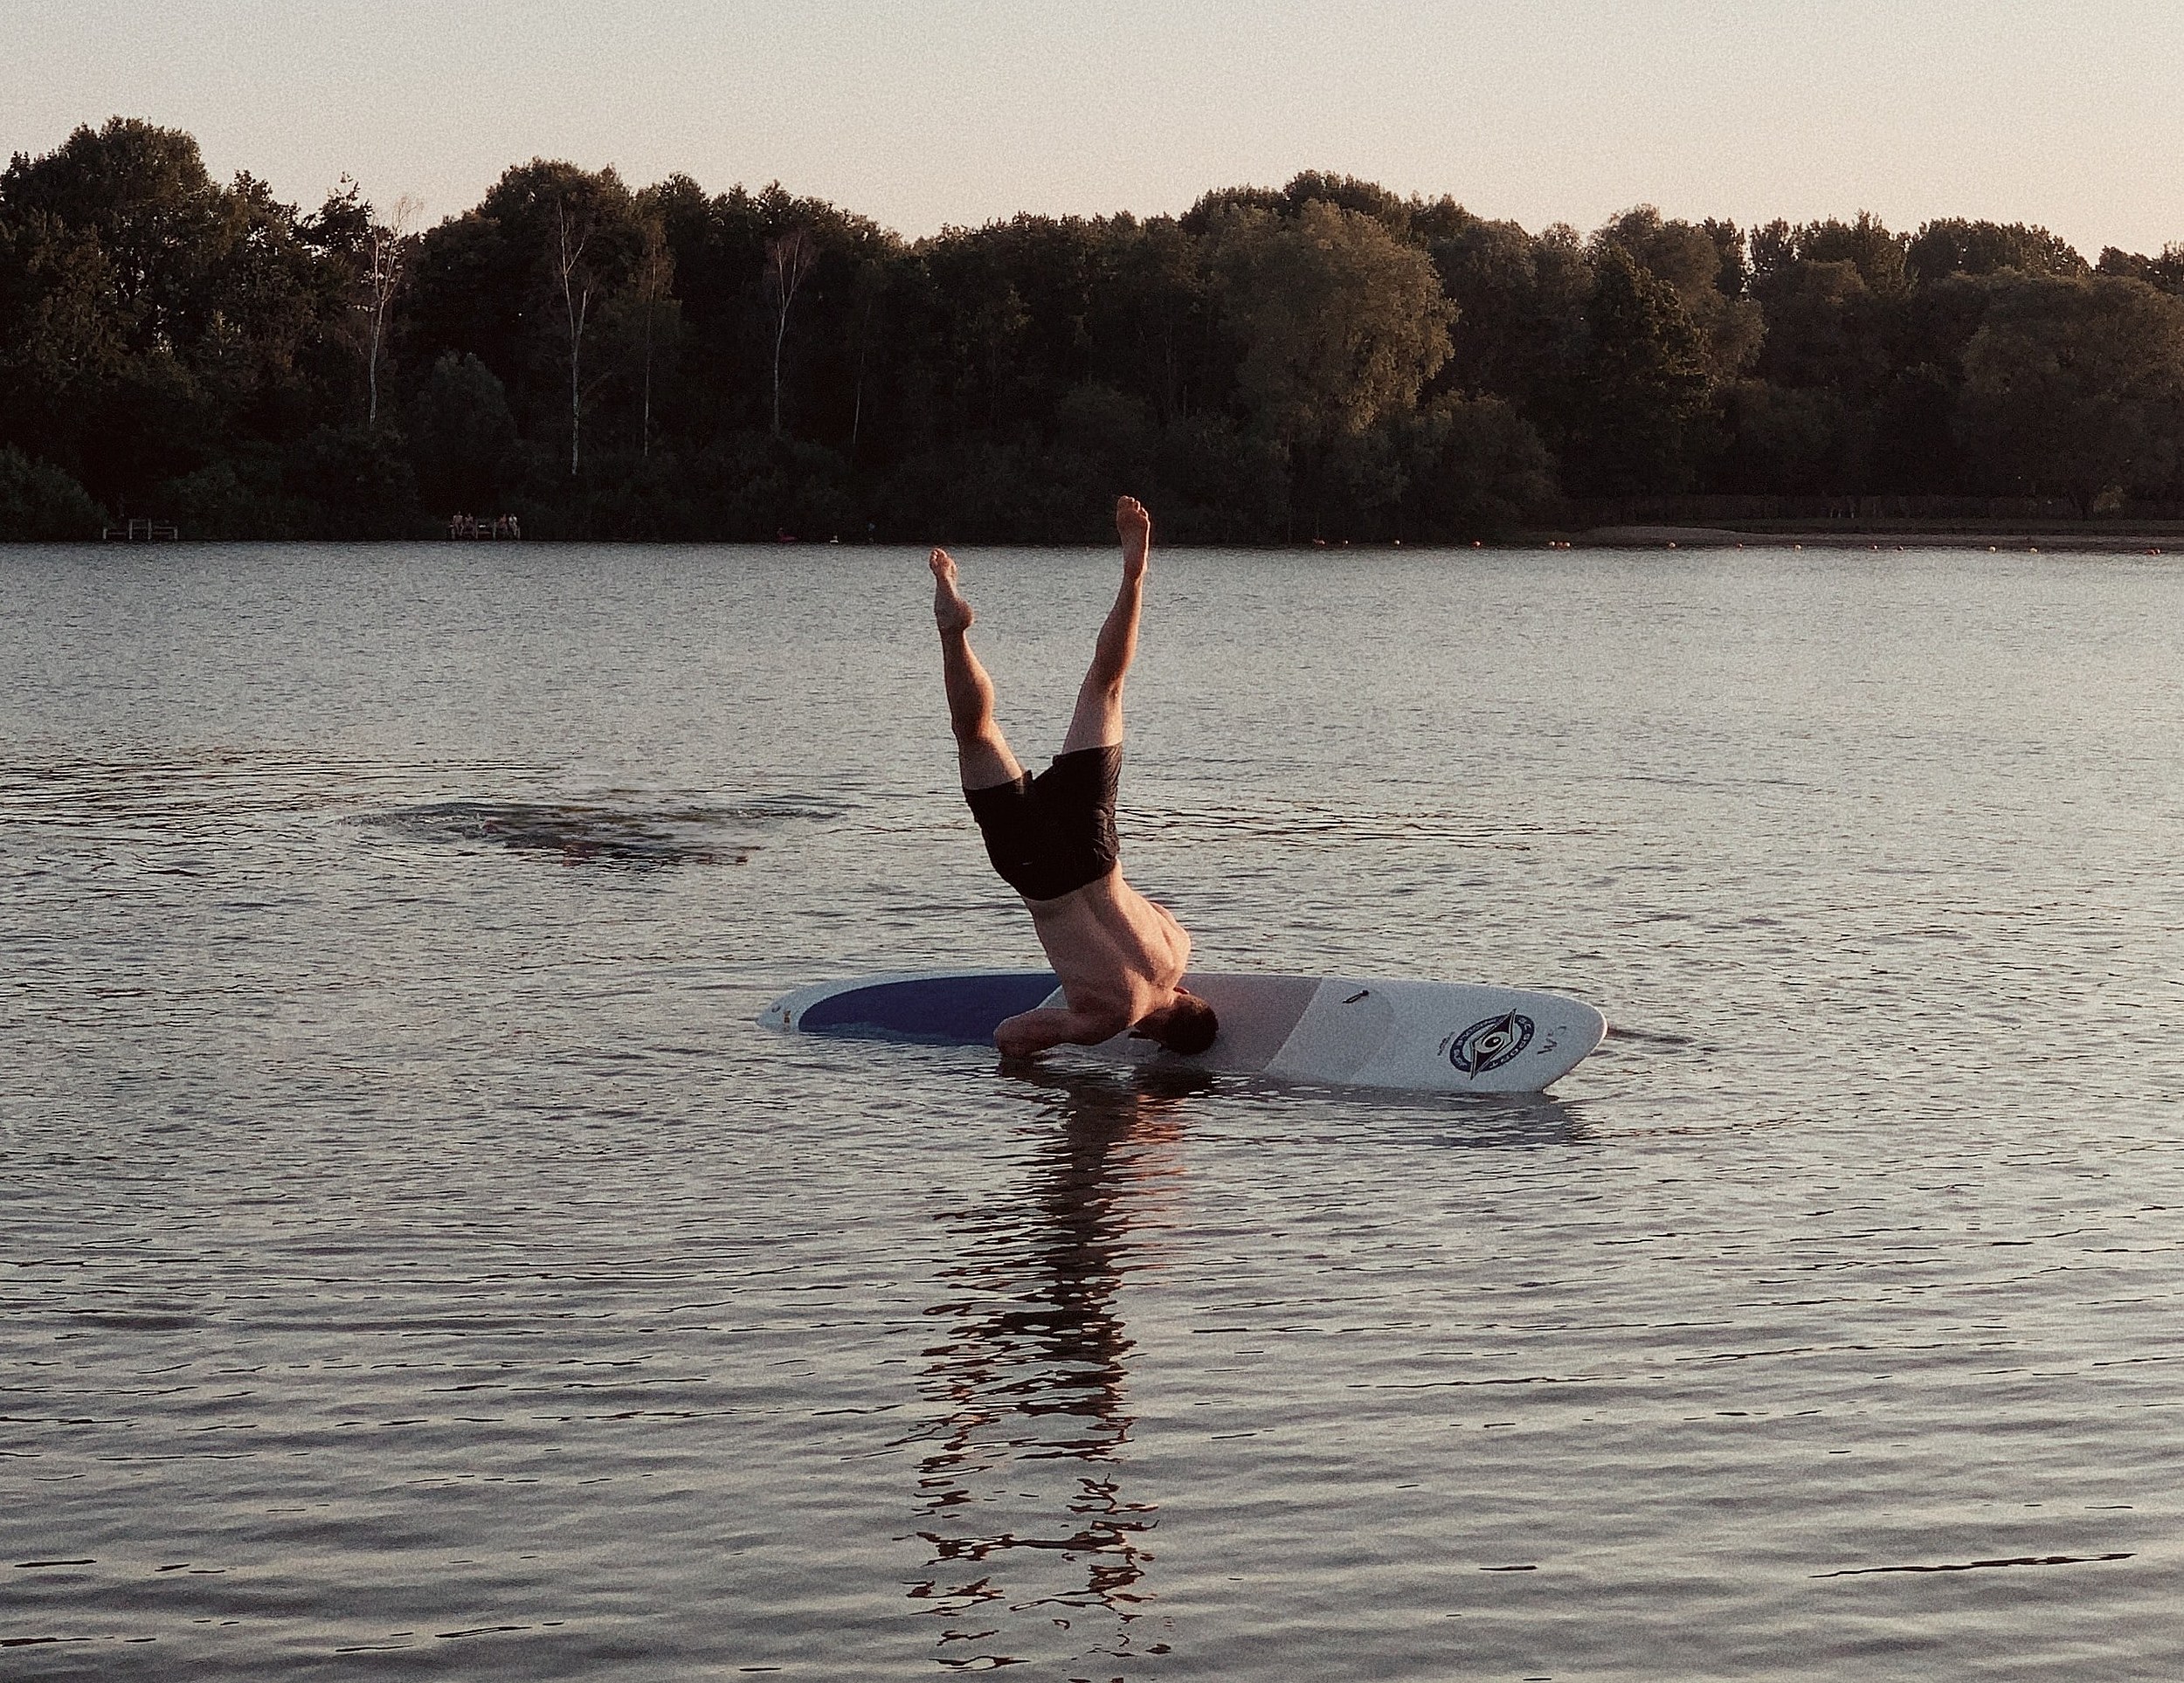 Ultimate WNY Wakeboard Fail – When Confidence Overtakes Your
Abilities